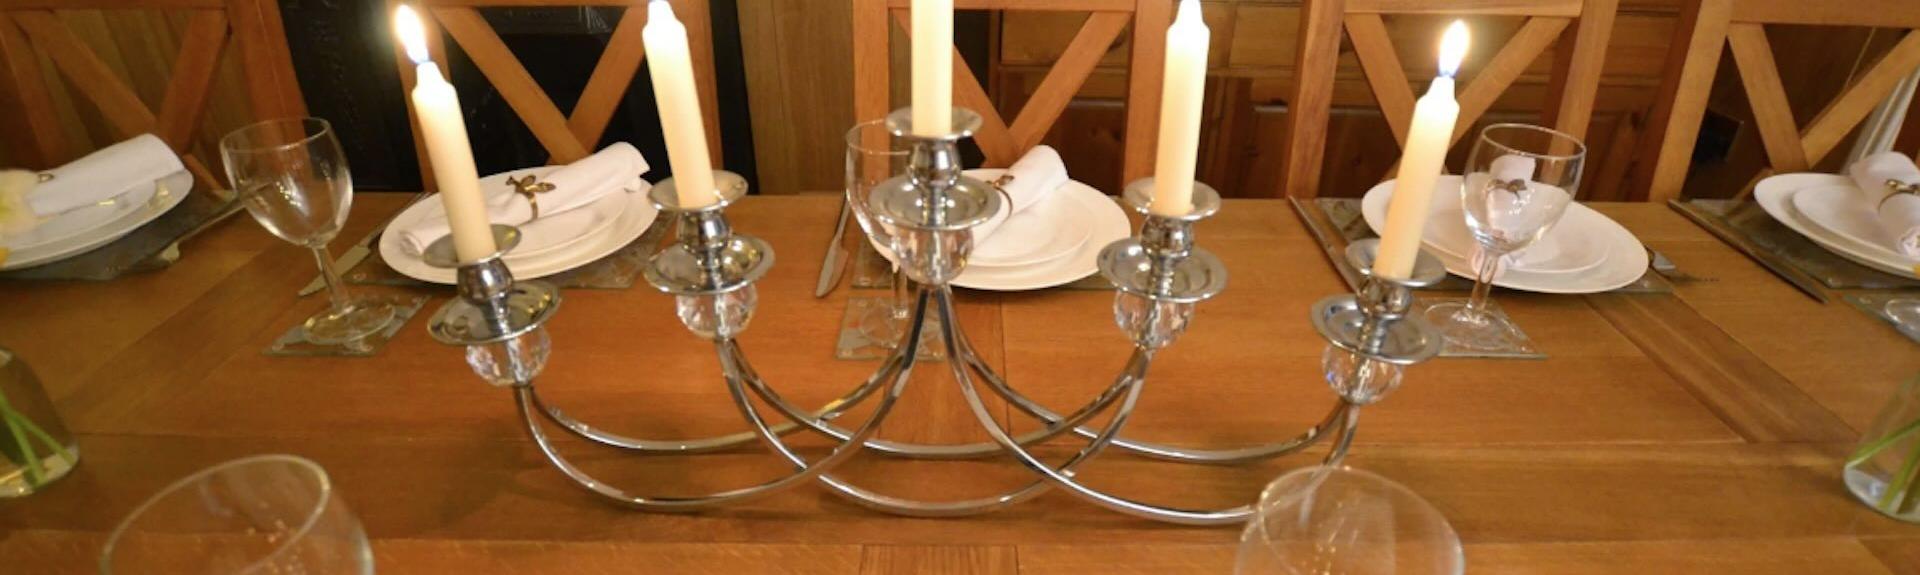 5 brightly burning candles on a table candelabra.